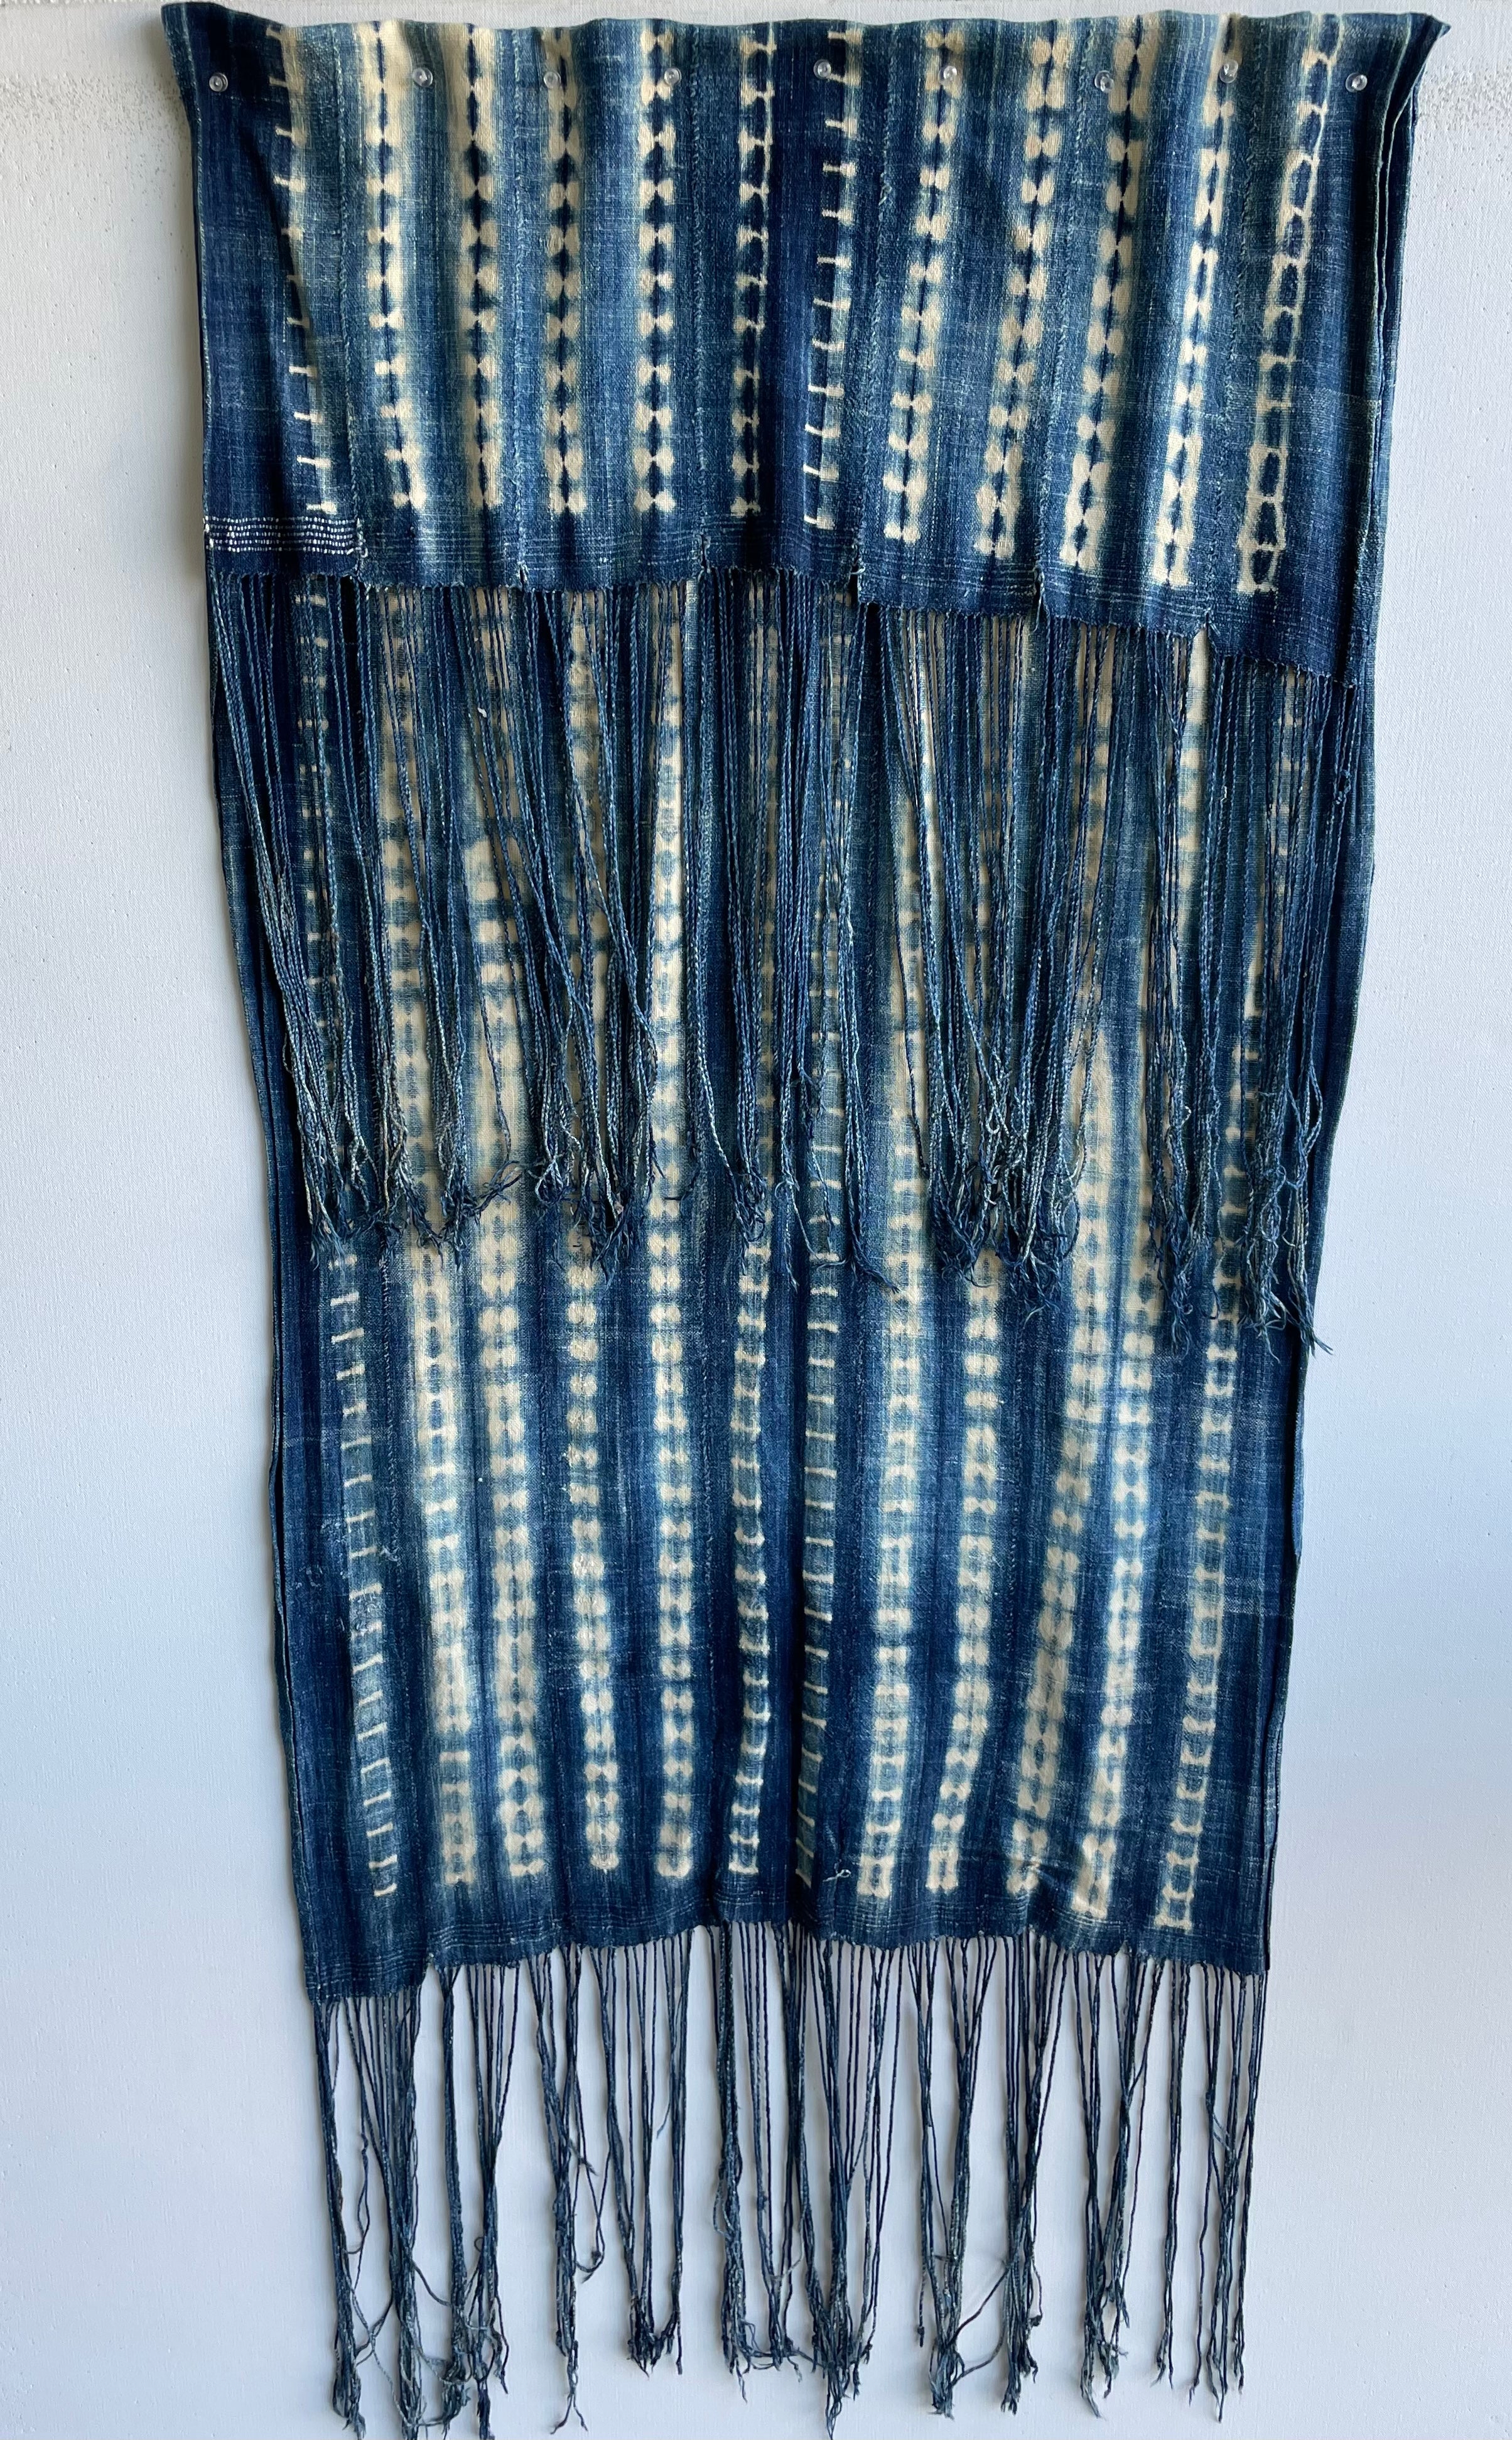 Handcrafted Textiles - Fabric - African Art - Indigo - Cotton - Used - Scarf